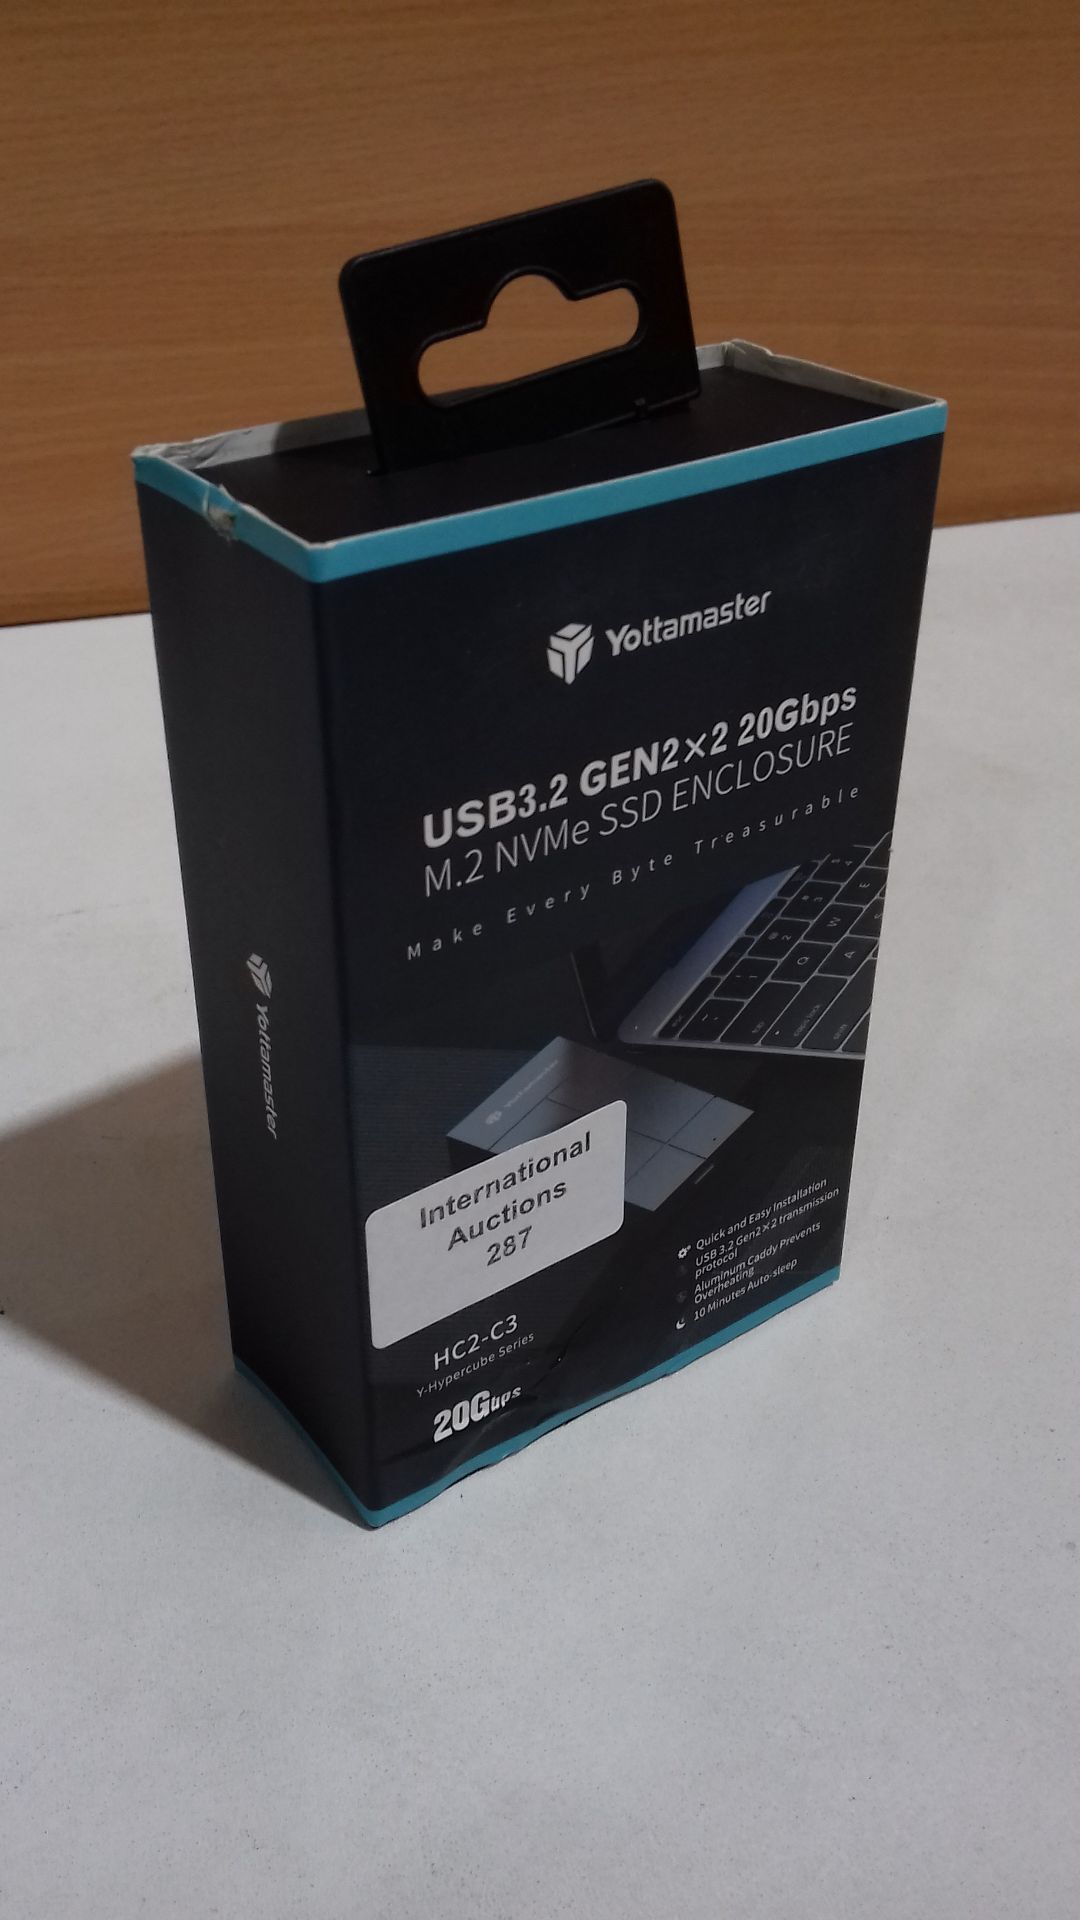 RRP £58.81 Yottamaster USB3.2 20Gbps M.2 NVMe SSD Enclosure - Image 2 of 2